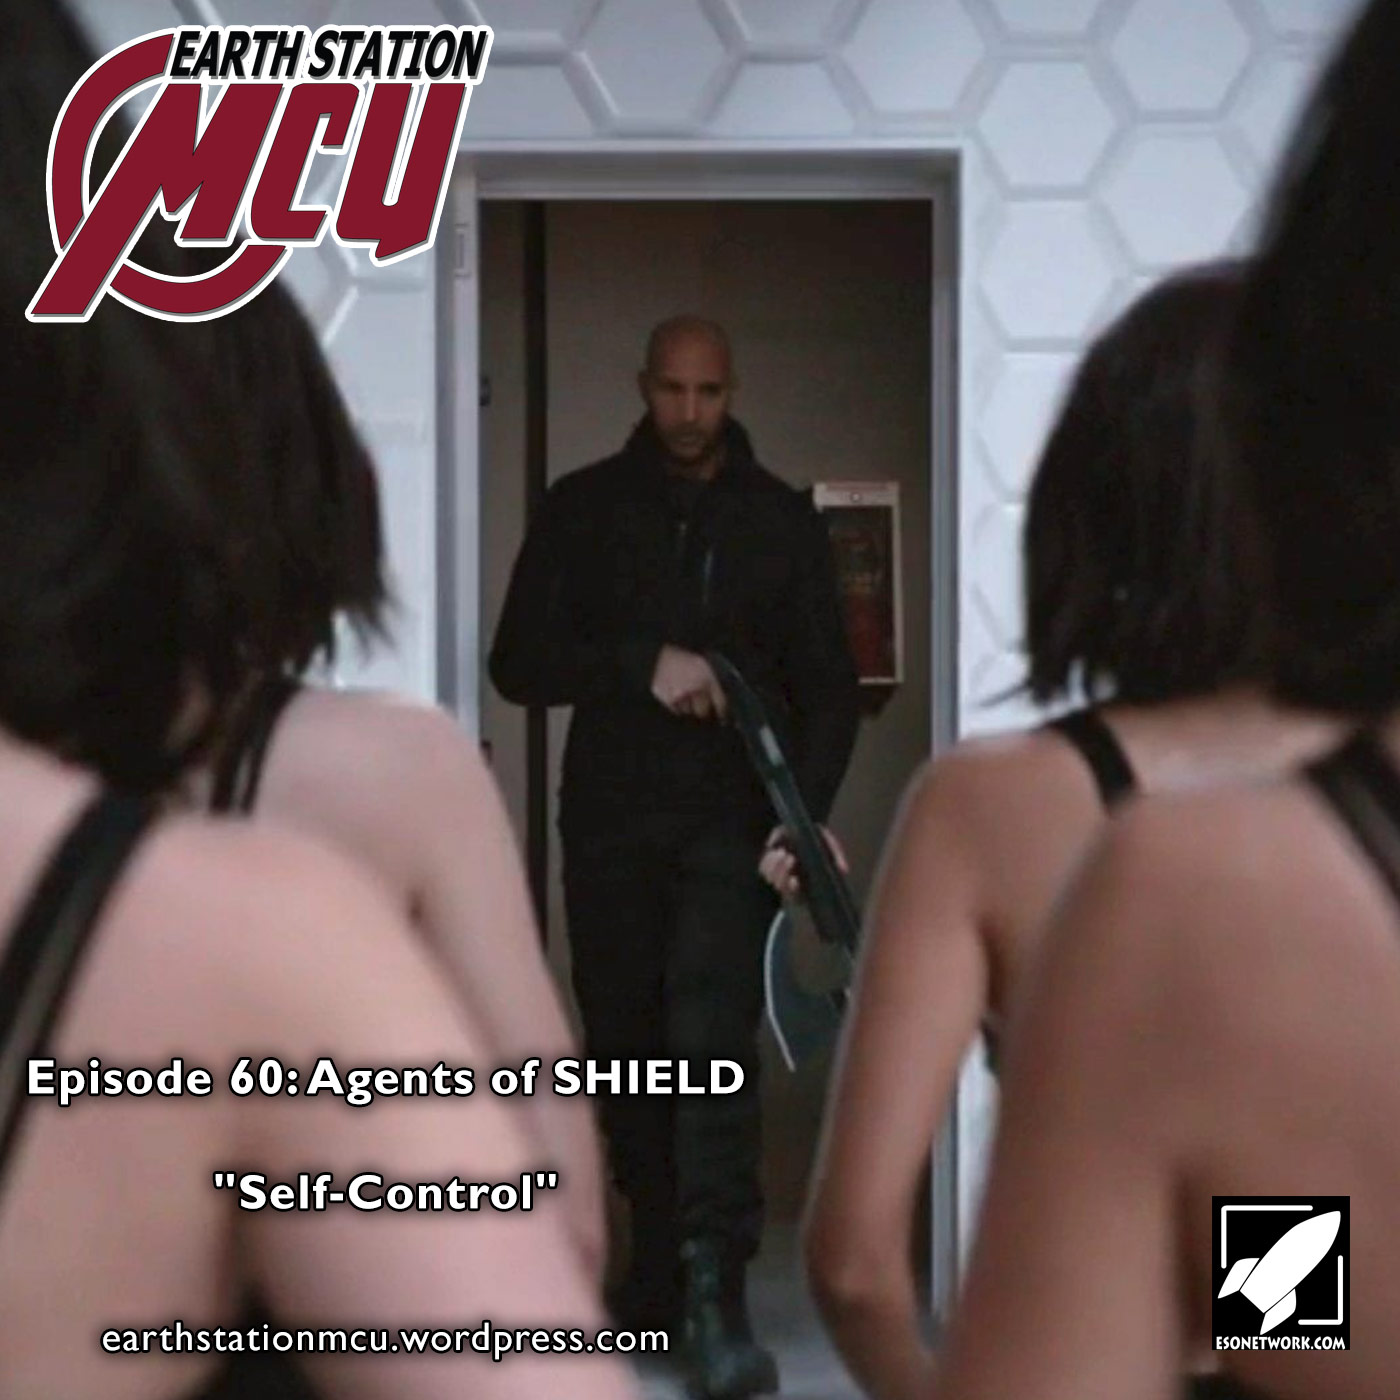 Earth Station MCU Episode 60: Agents of SHIELD ”Self-Control”